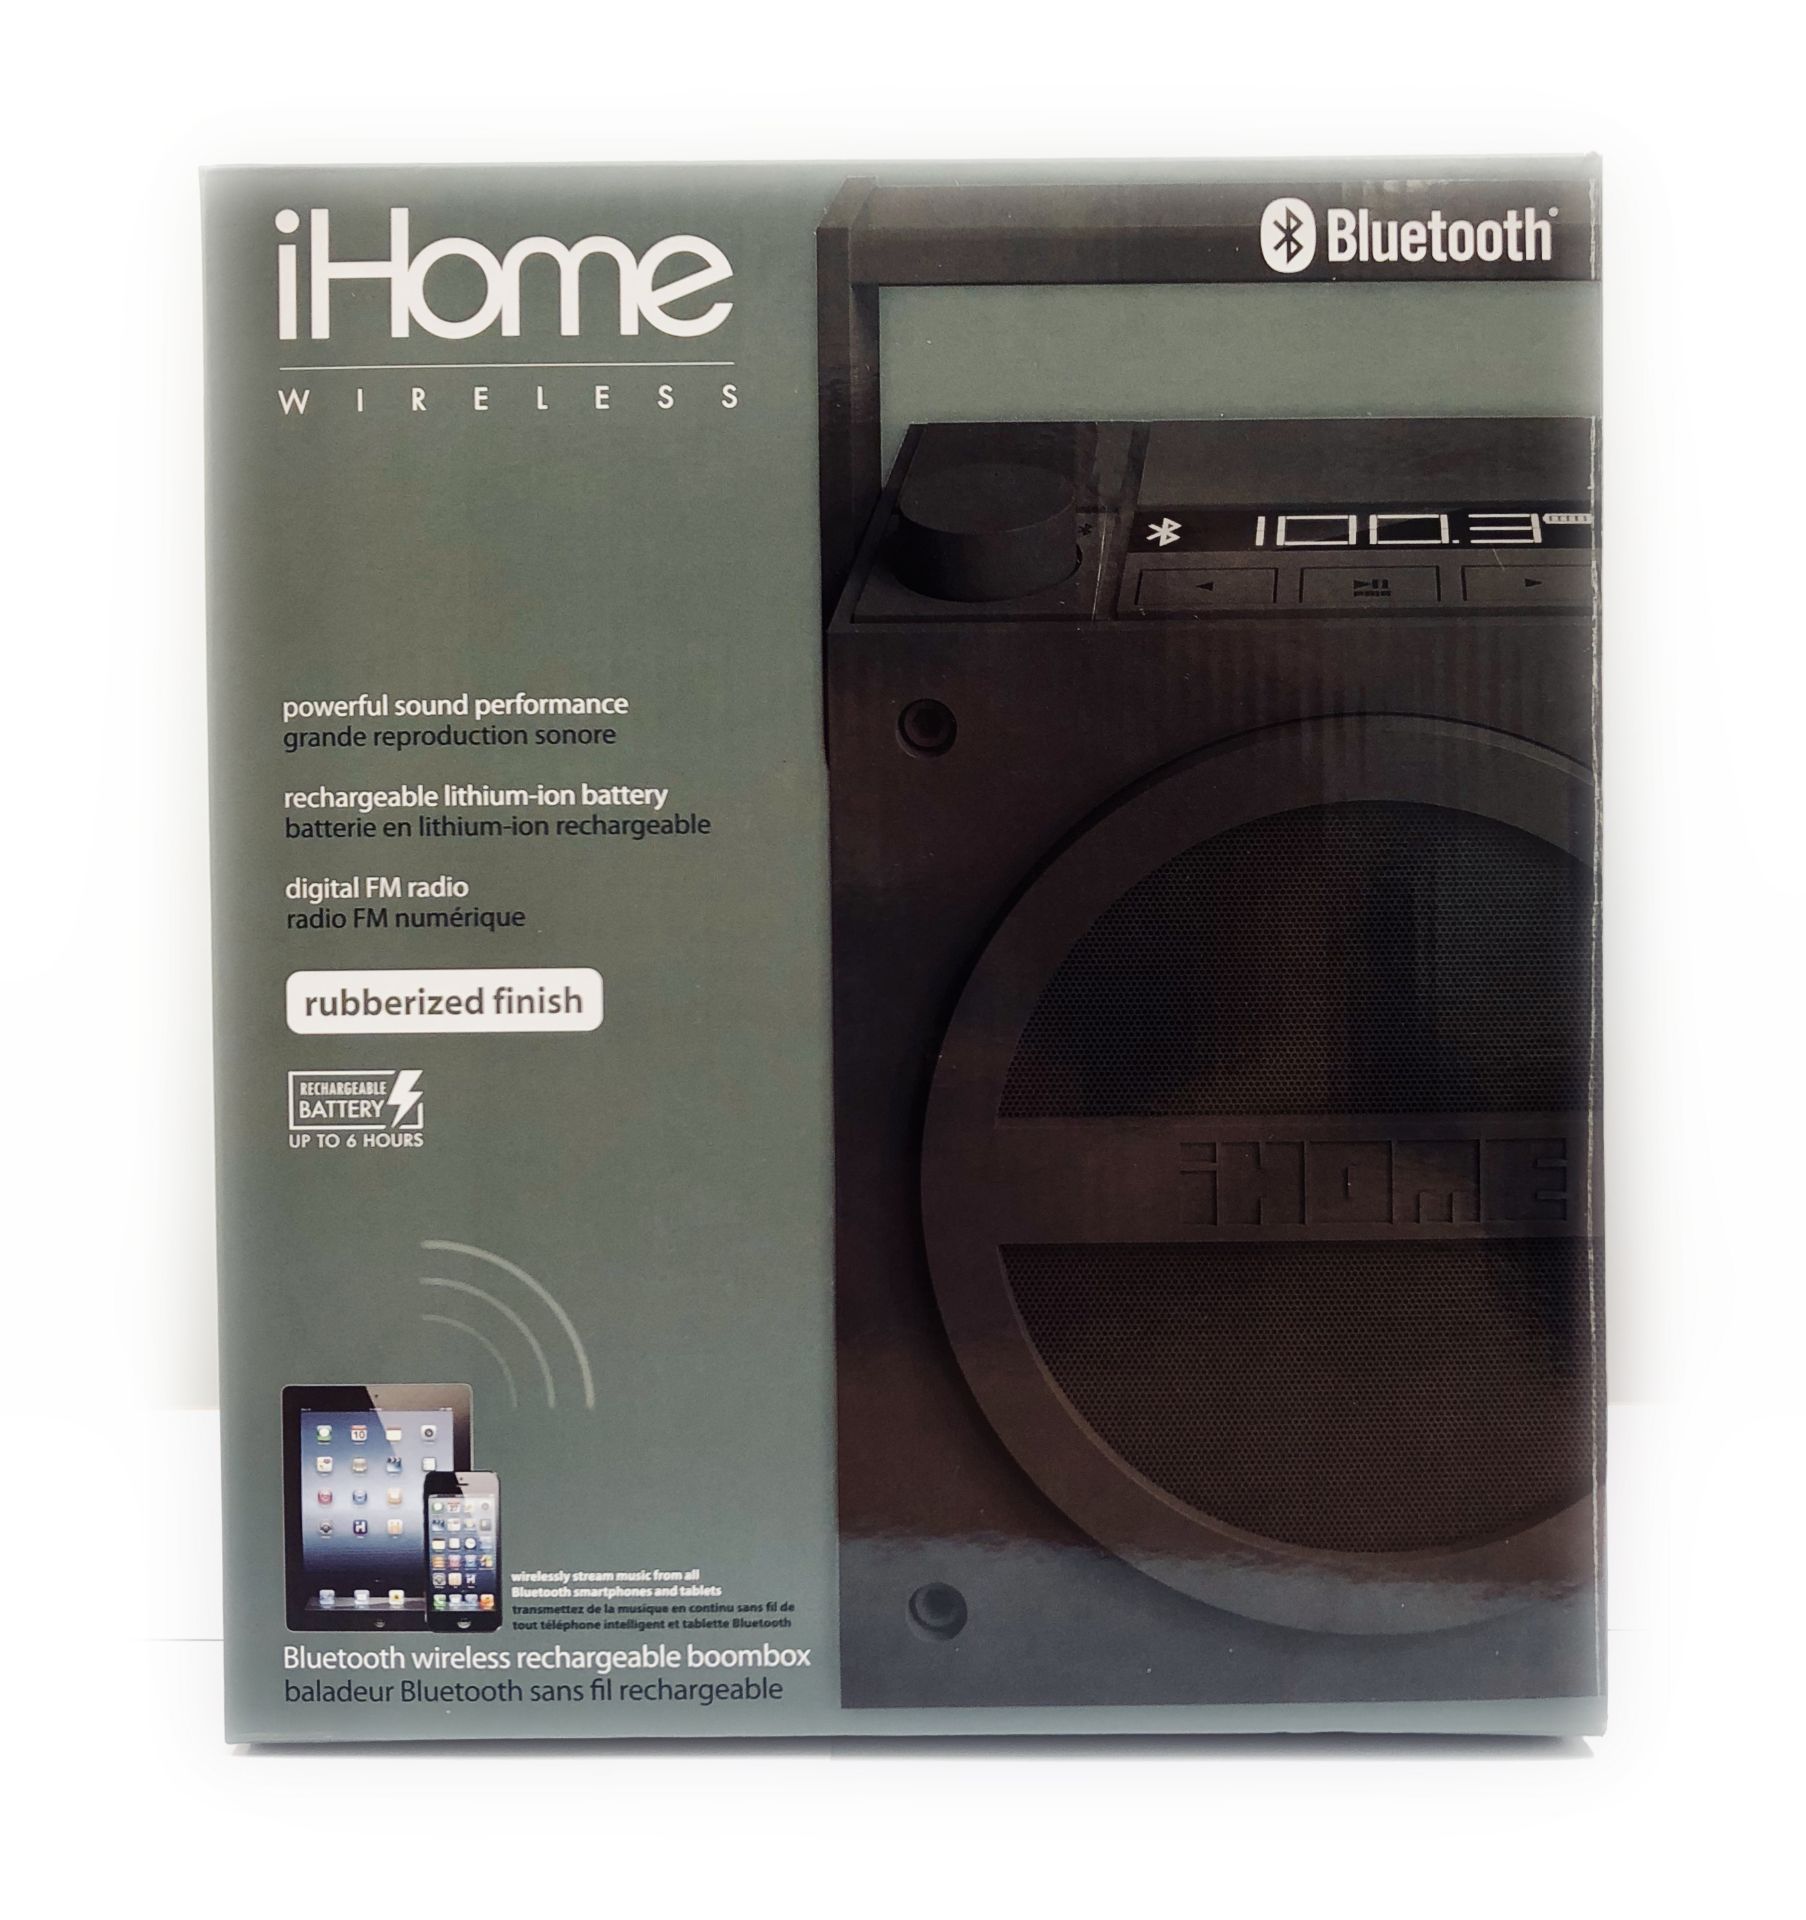 V Brand New iHome Wireless Bluetooth Rechargeable Boom Box - ISP £39.95 (Radioworld UK) - Up to 6 - Image 4 of 4